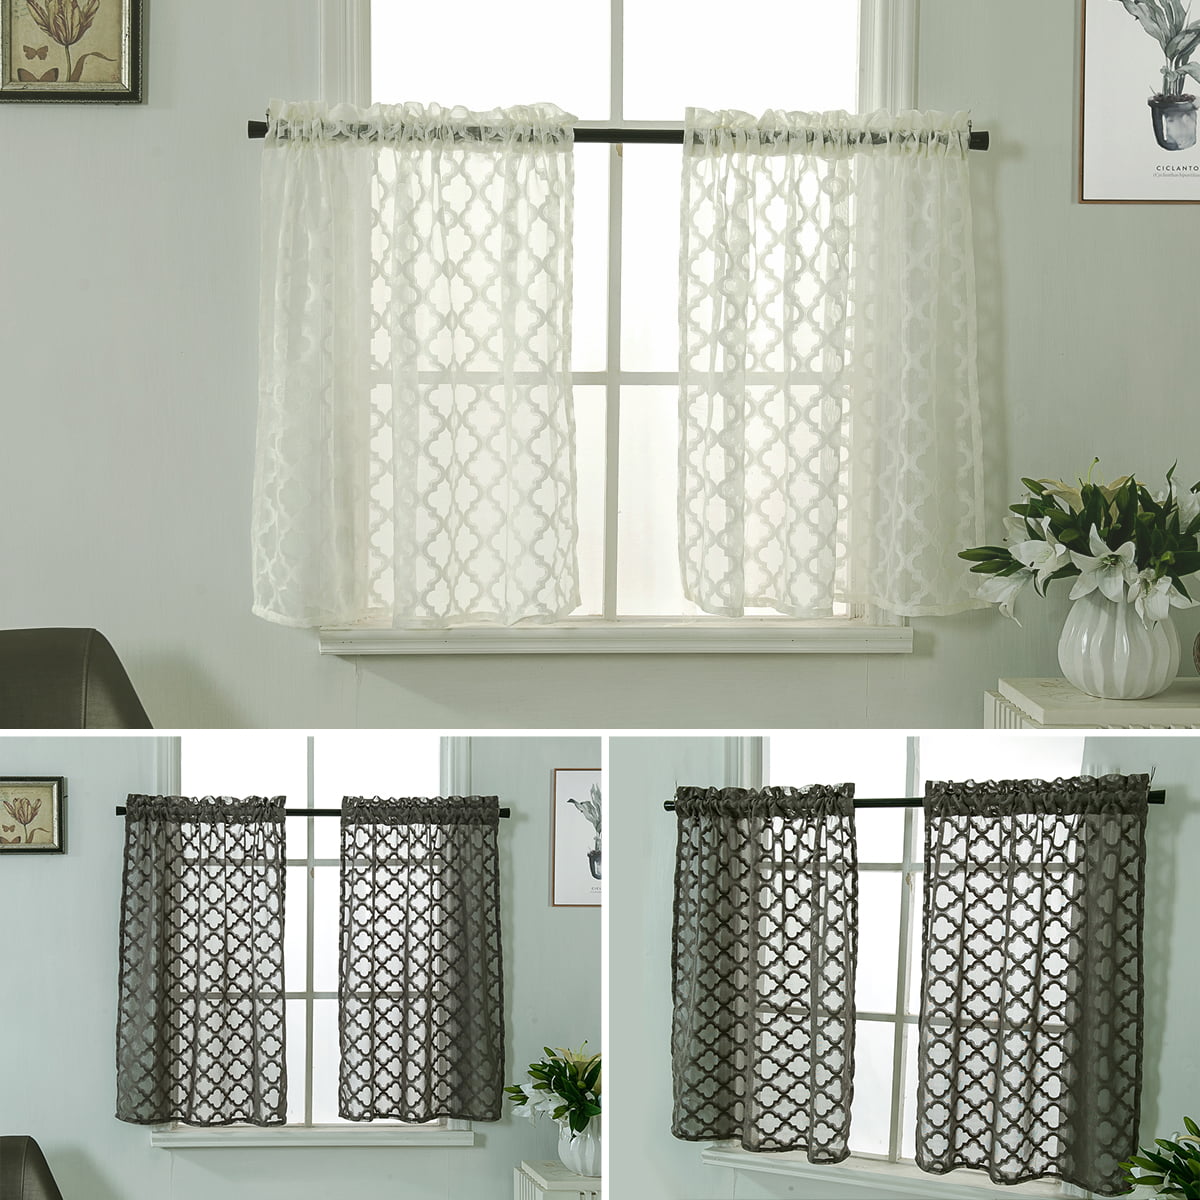 Embroidery Home Kitchen Curtain Cafe Lace Valance Window Sheer Voile Short Panel 